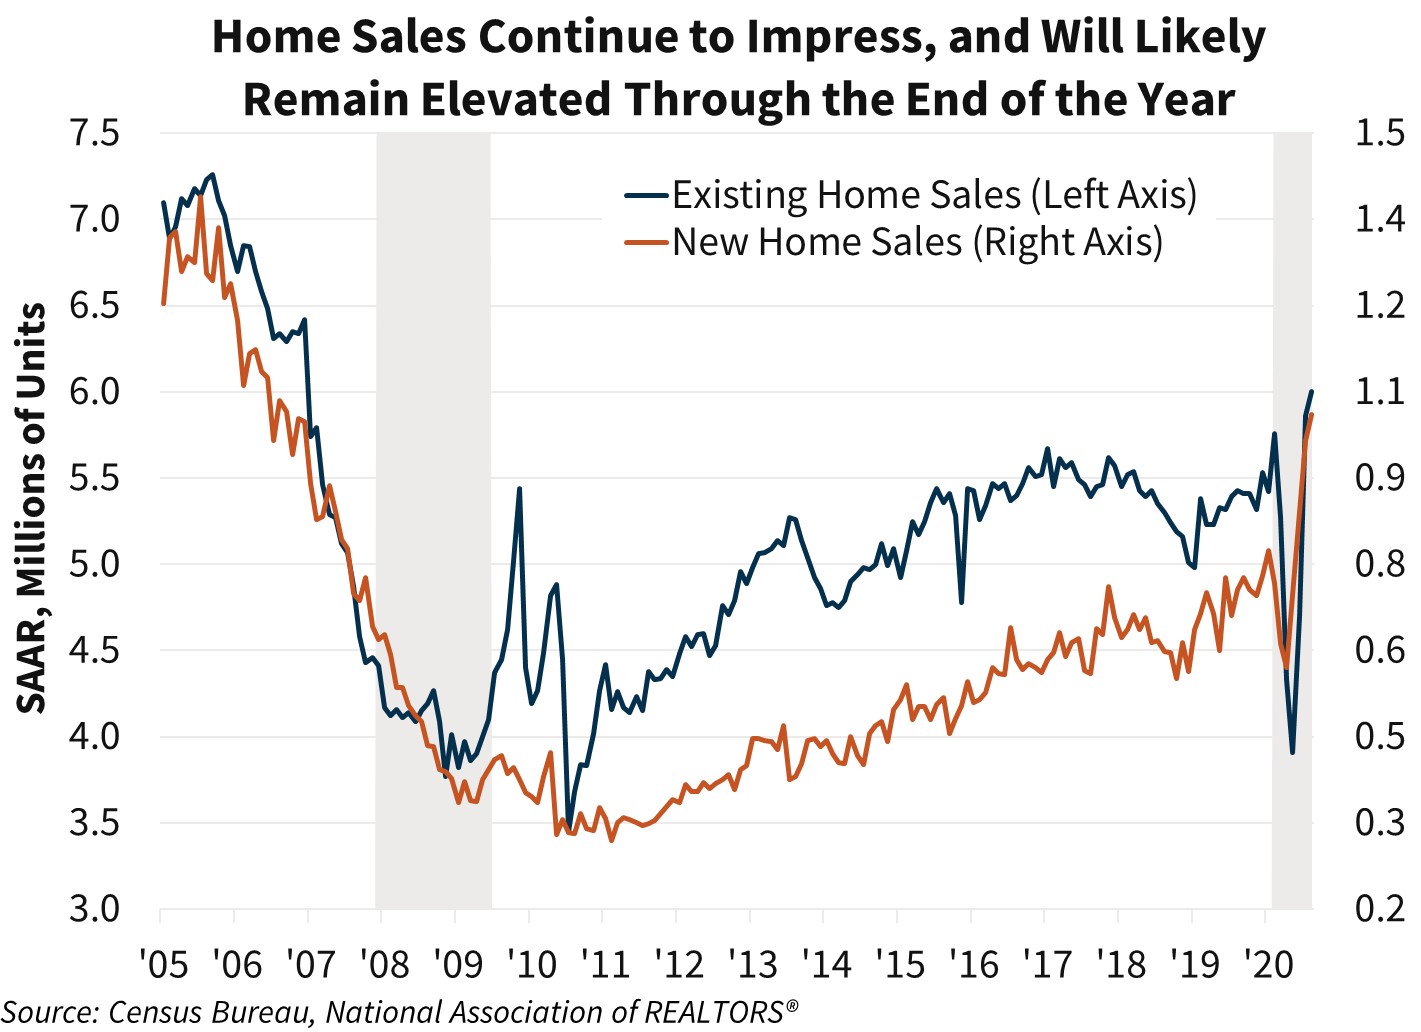  Home Sales Cointinue to Impress, and Will Likely Remain Elevated Through the End of the Year